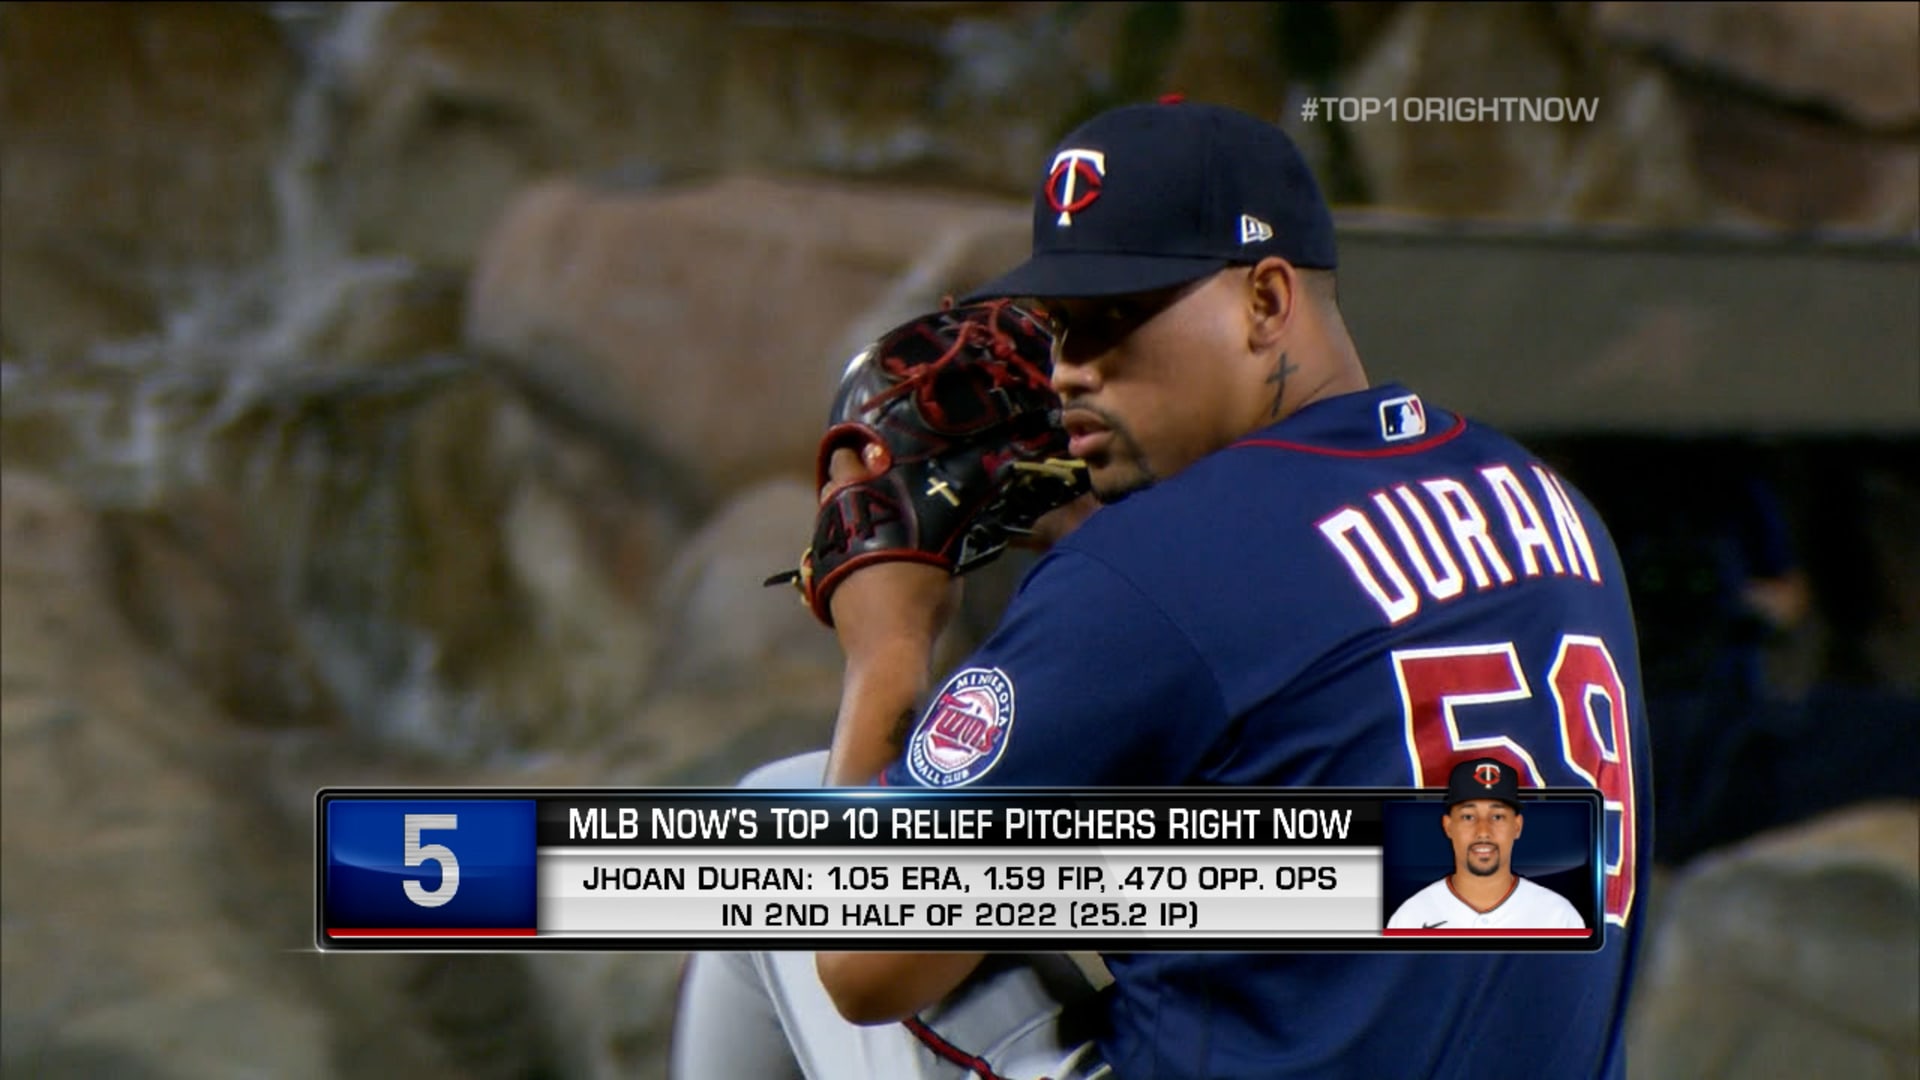 Top 10 Relief Pitchers in the MLB